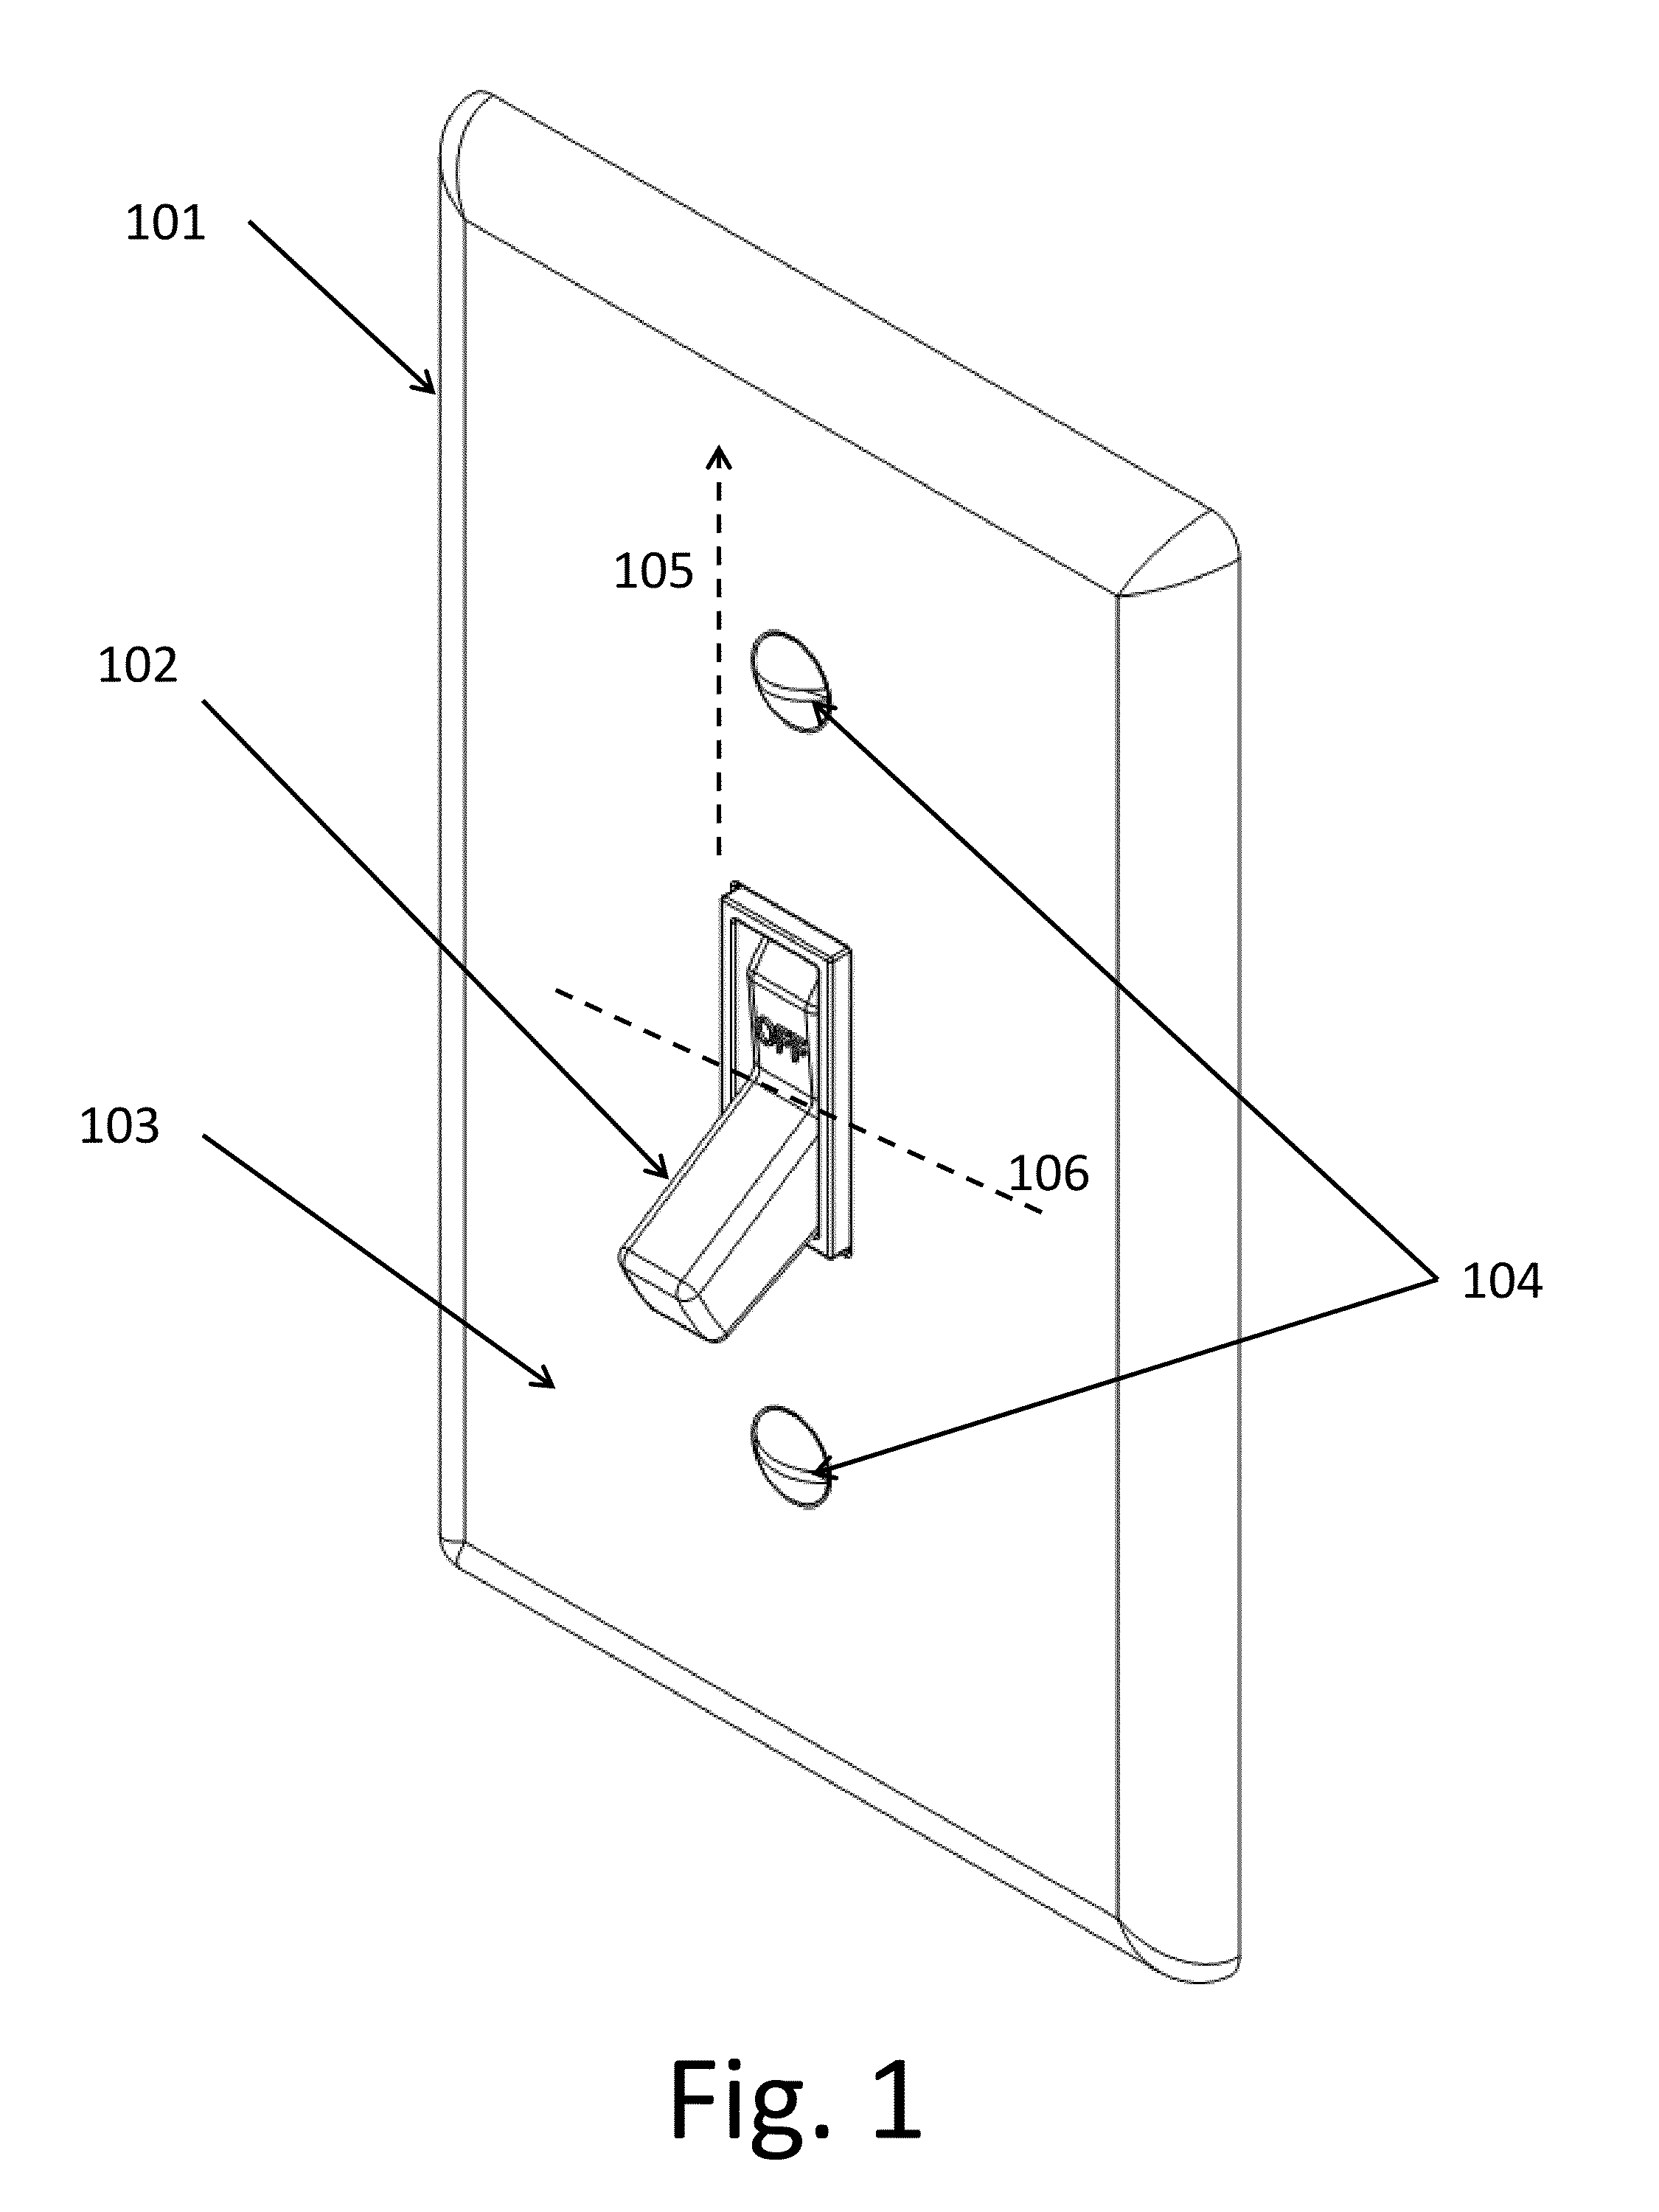 Switch automation device